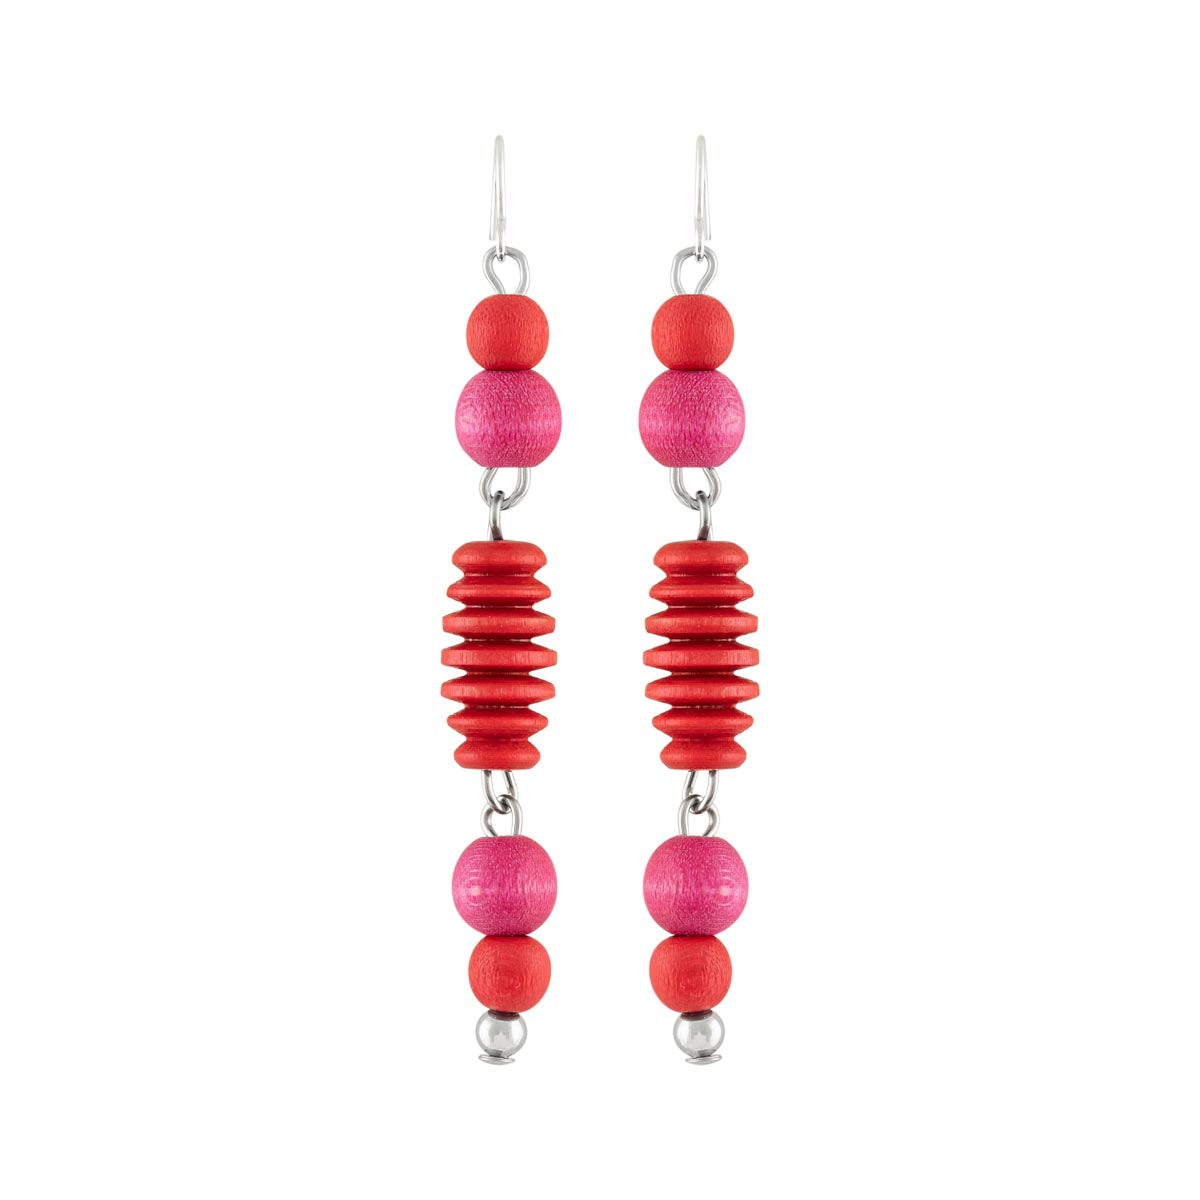 Tuire earrings, red and pink